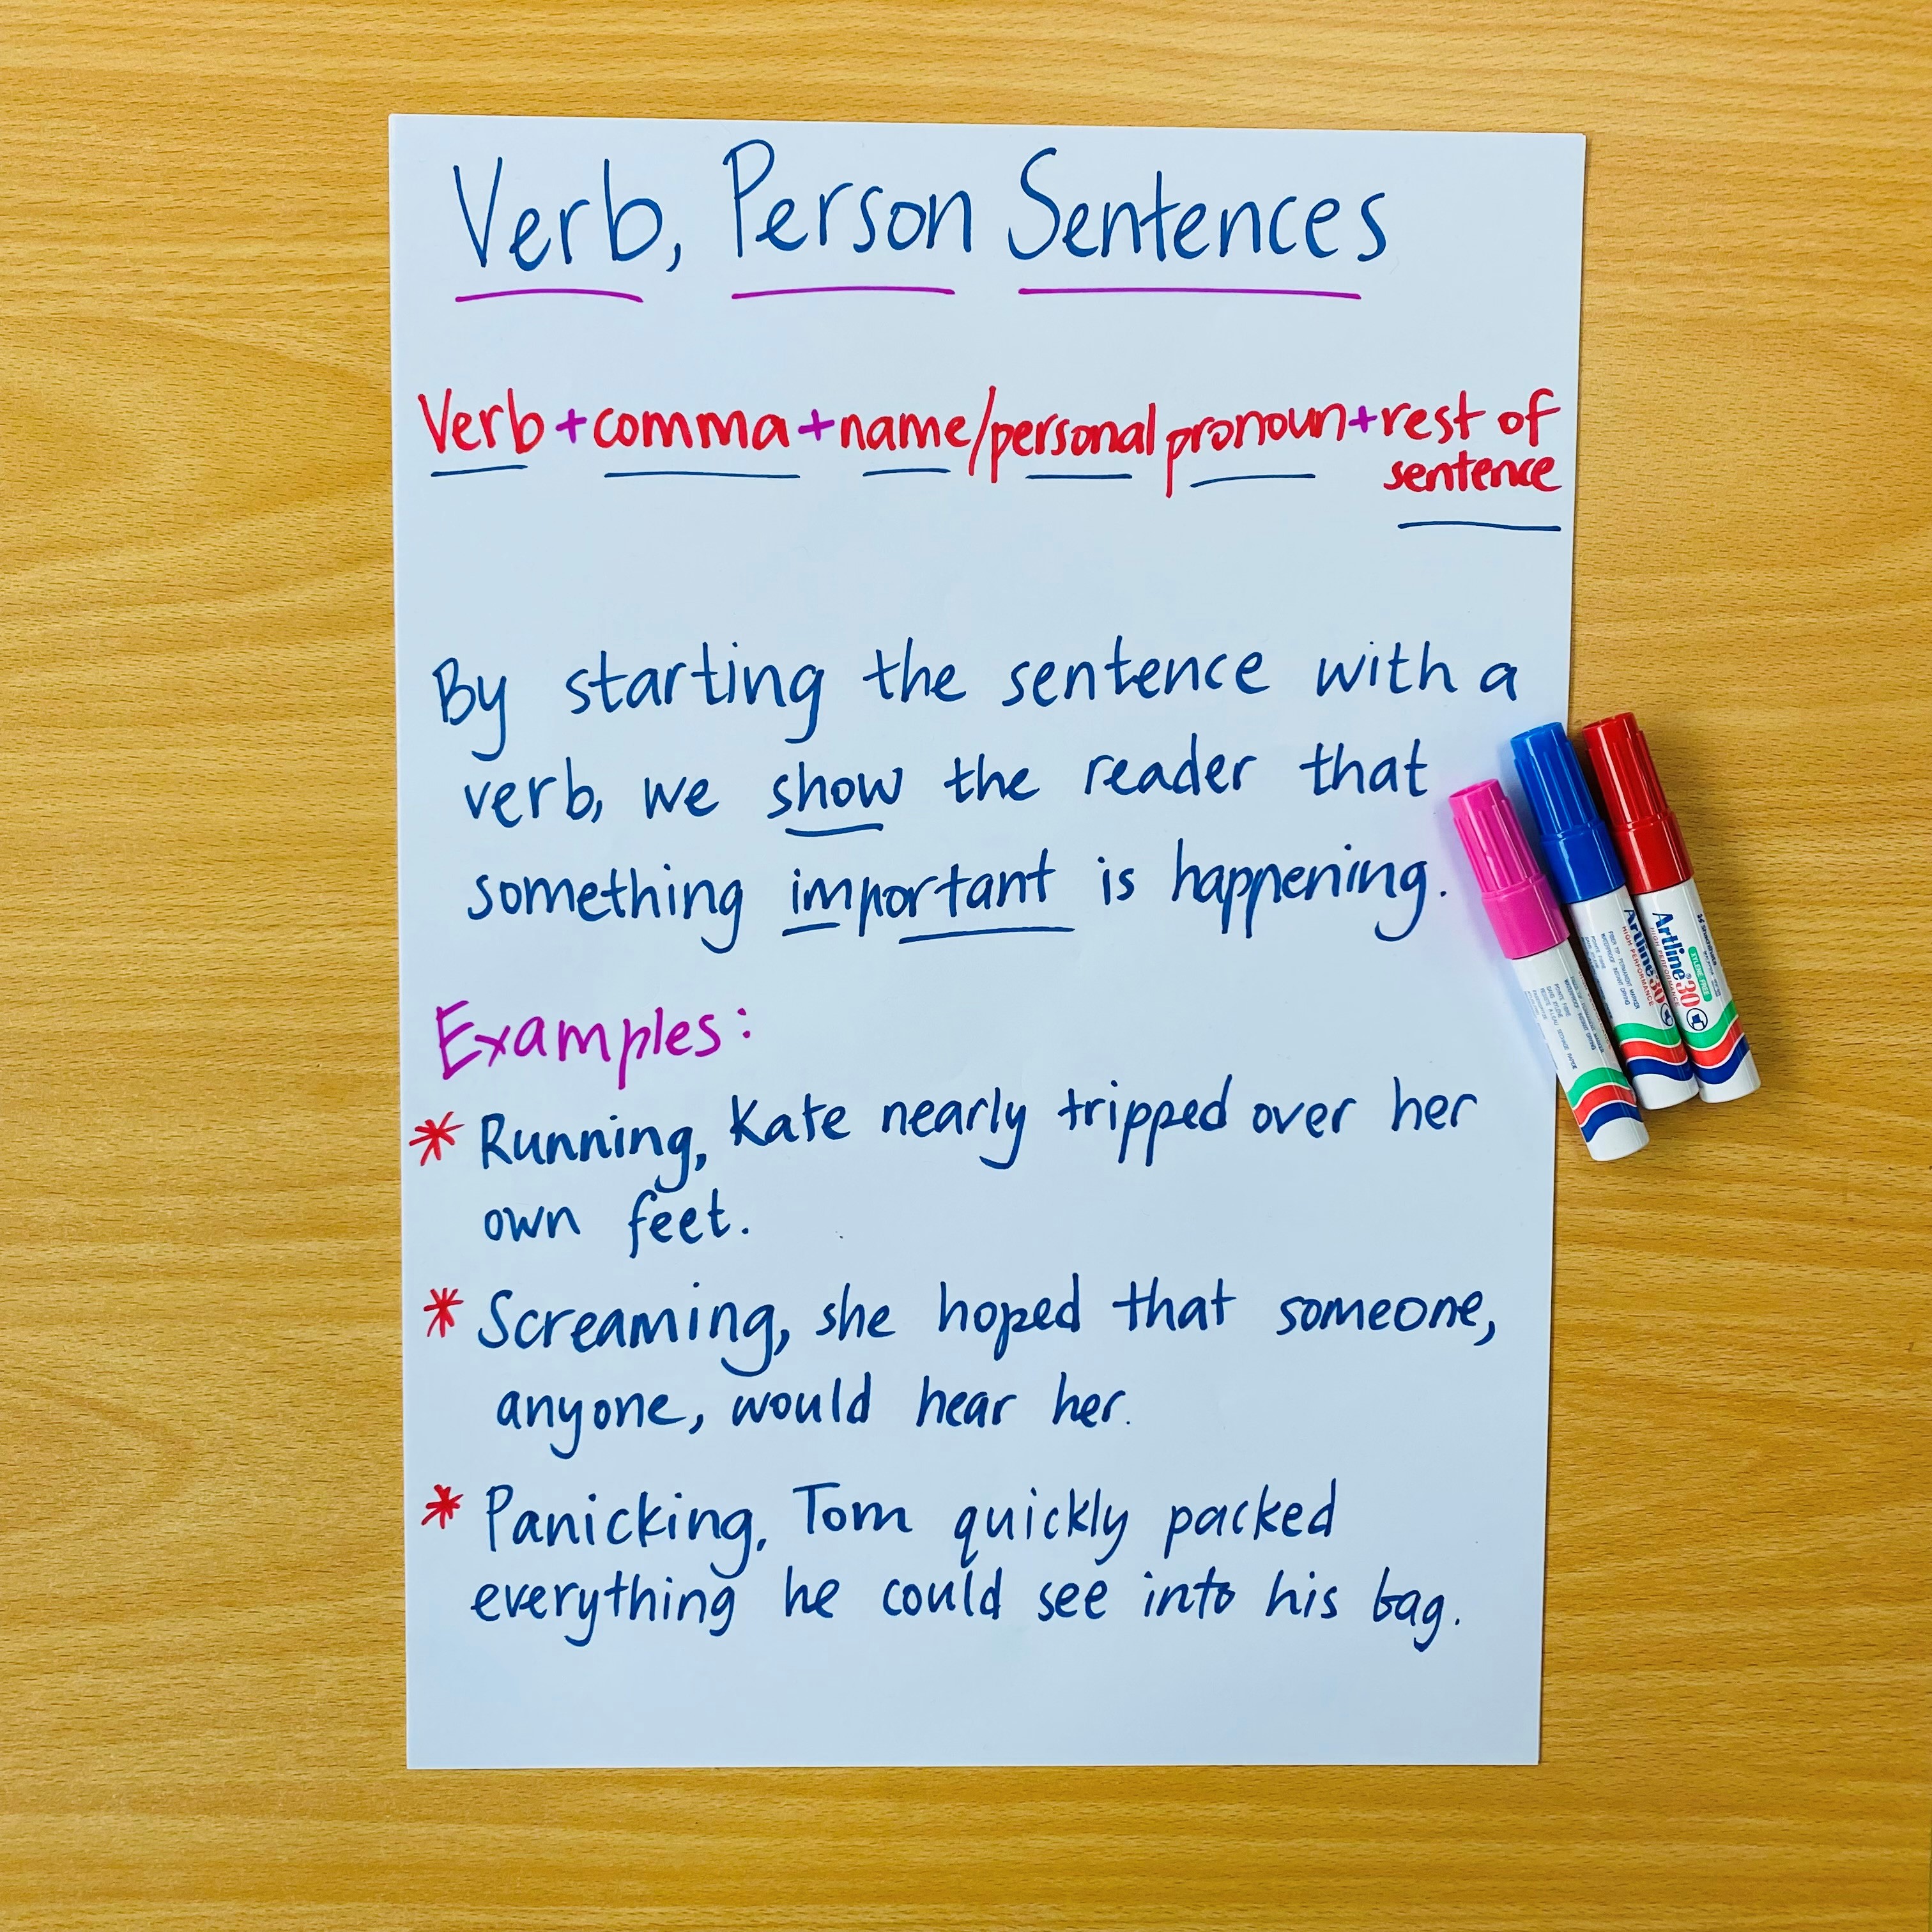 An engaging writing lesson to support students to write engaging sentences, following the Verb, Person structure. The lesson equips students with the skills required to construct a range of sentence types, using a range of verbs as sentence starters.